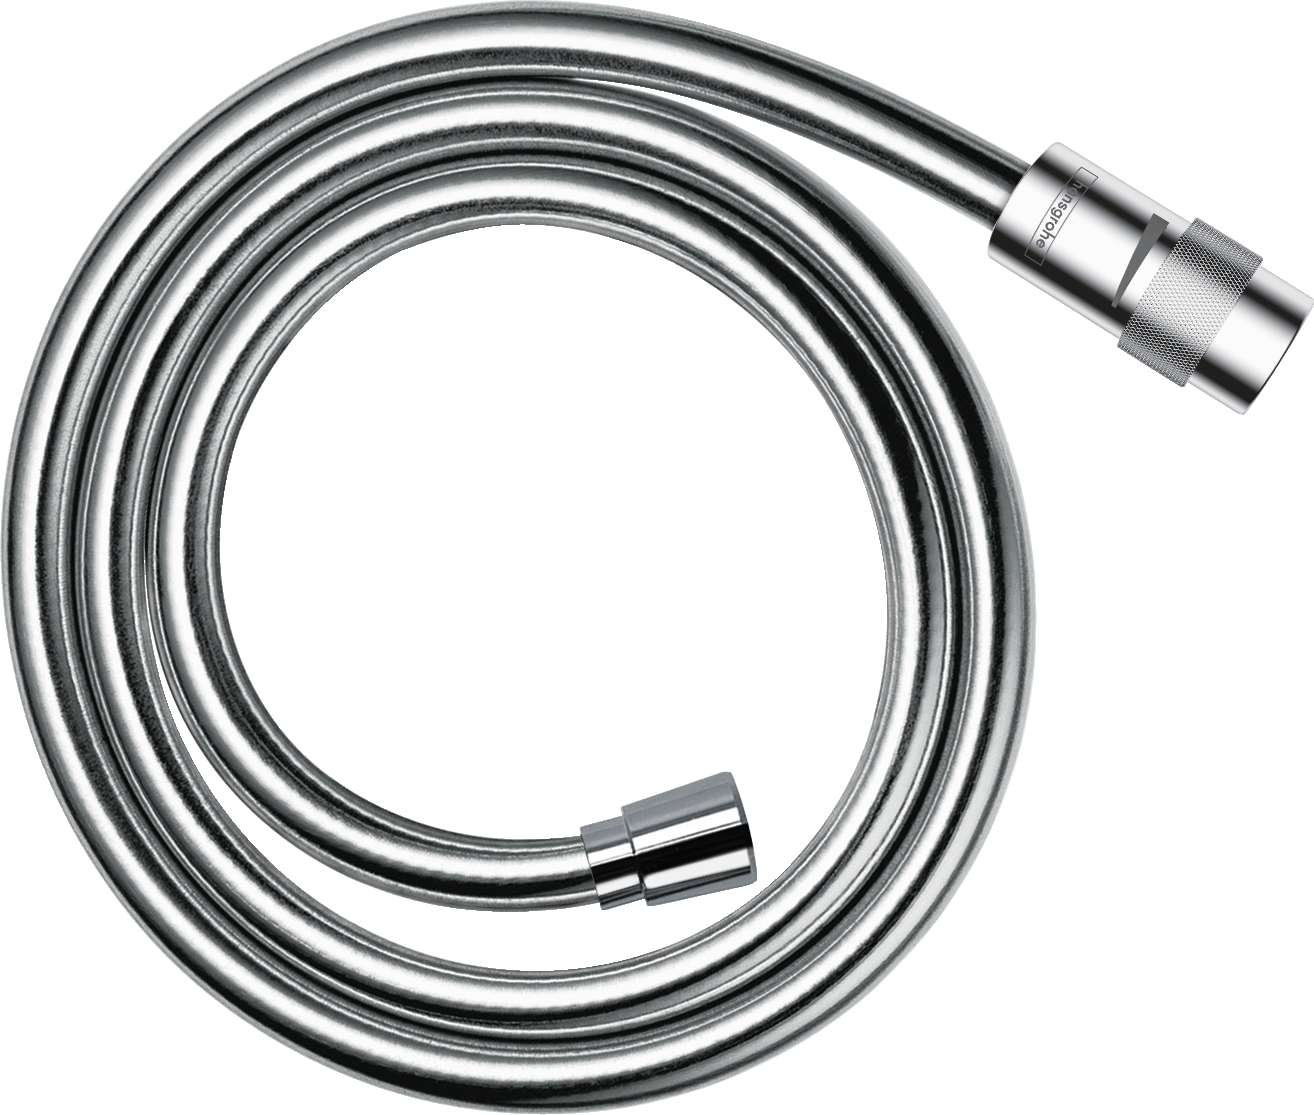 Isiflex Shower hose 125 cm with volume control